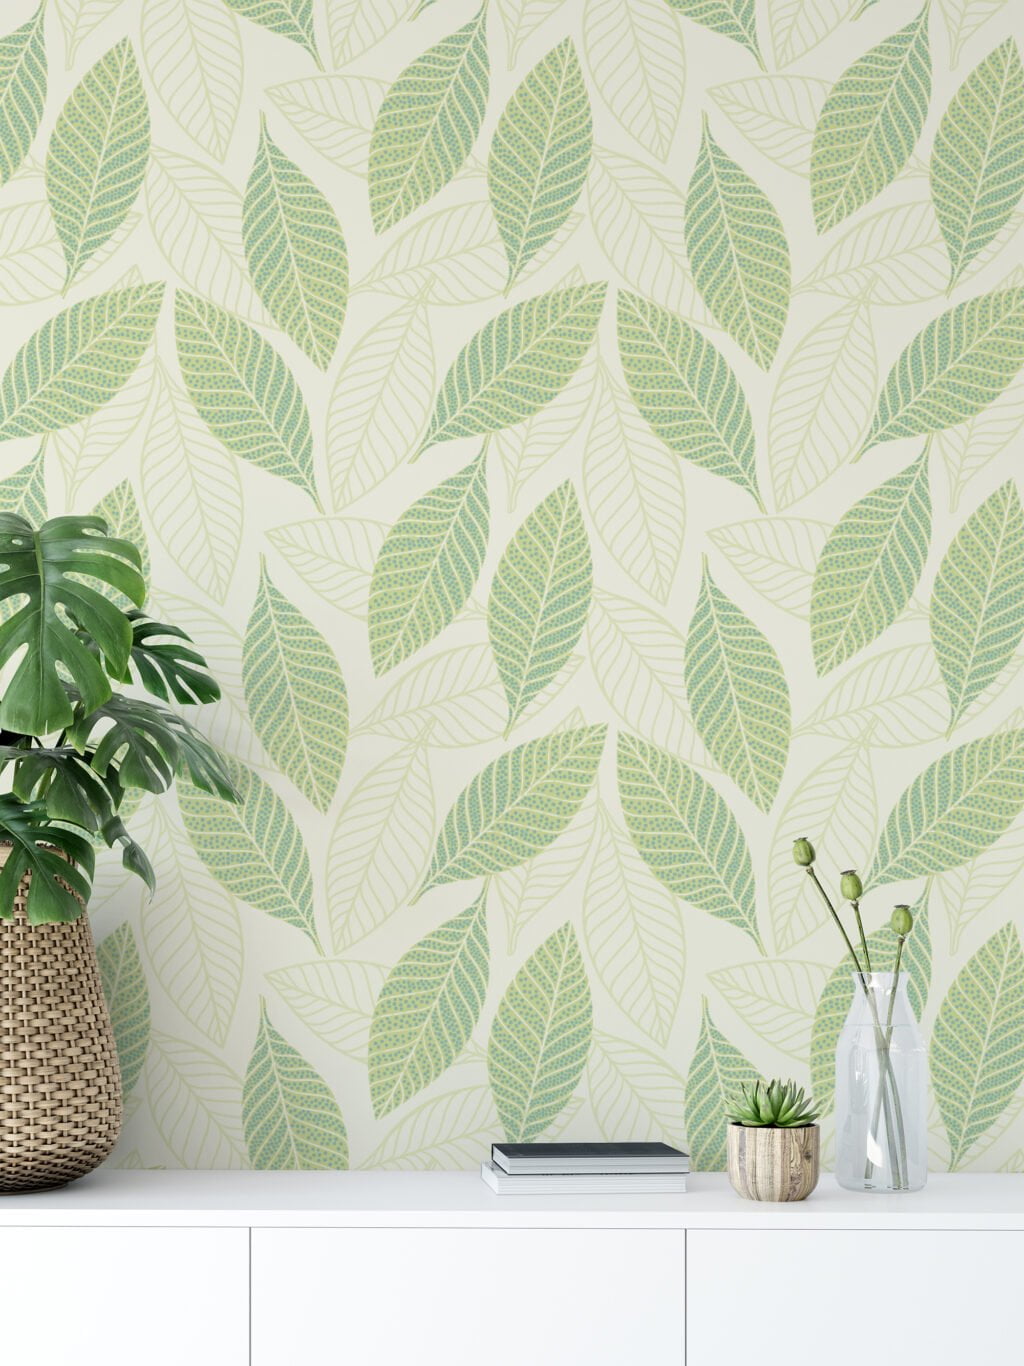 Abstract Green Leaves Illustration Wallpaper, Leaf Harmony Design Peel & Stick Wall Mural